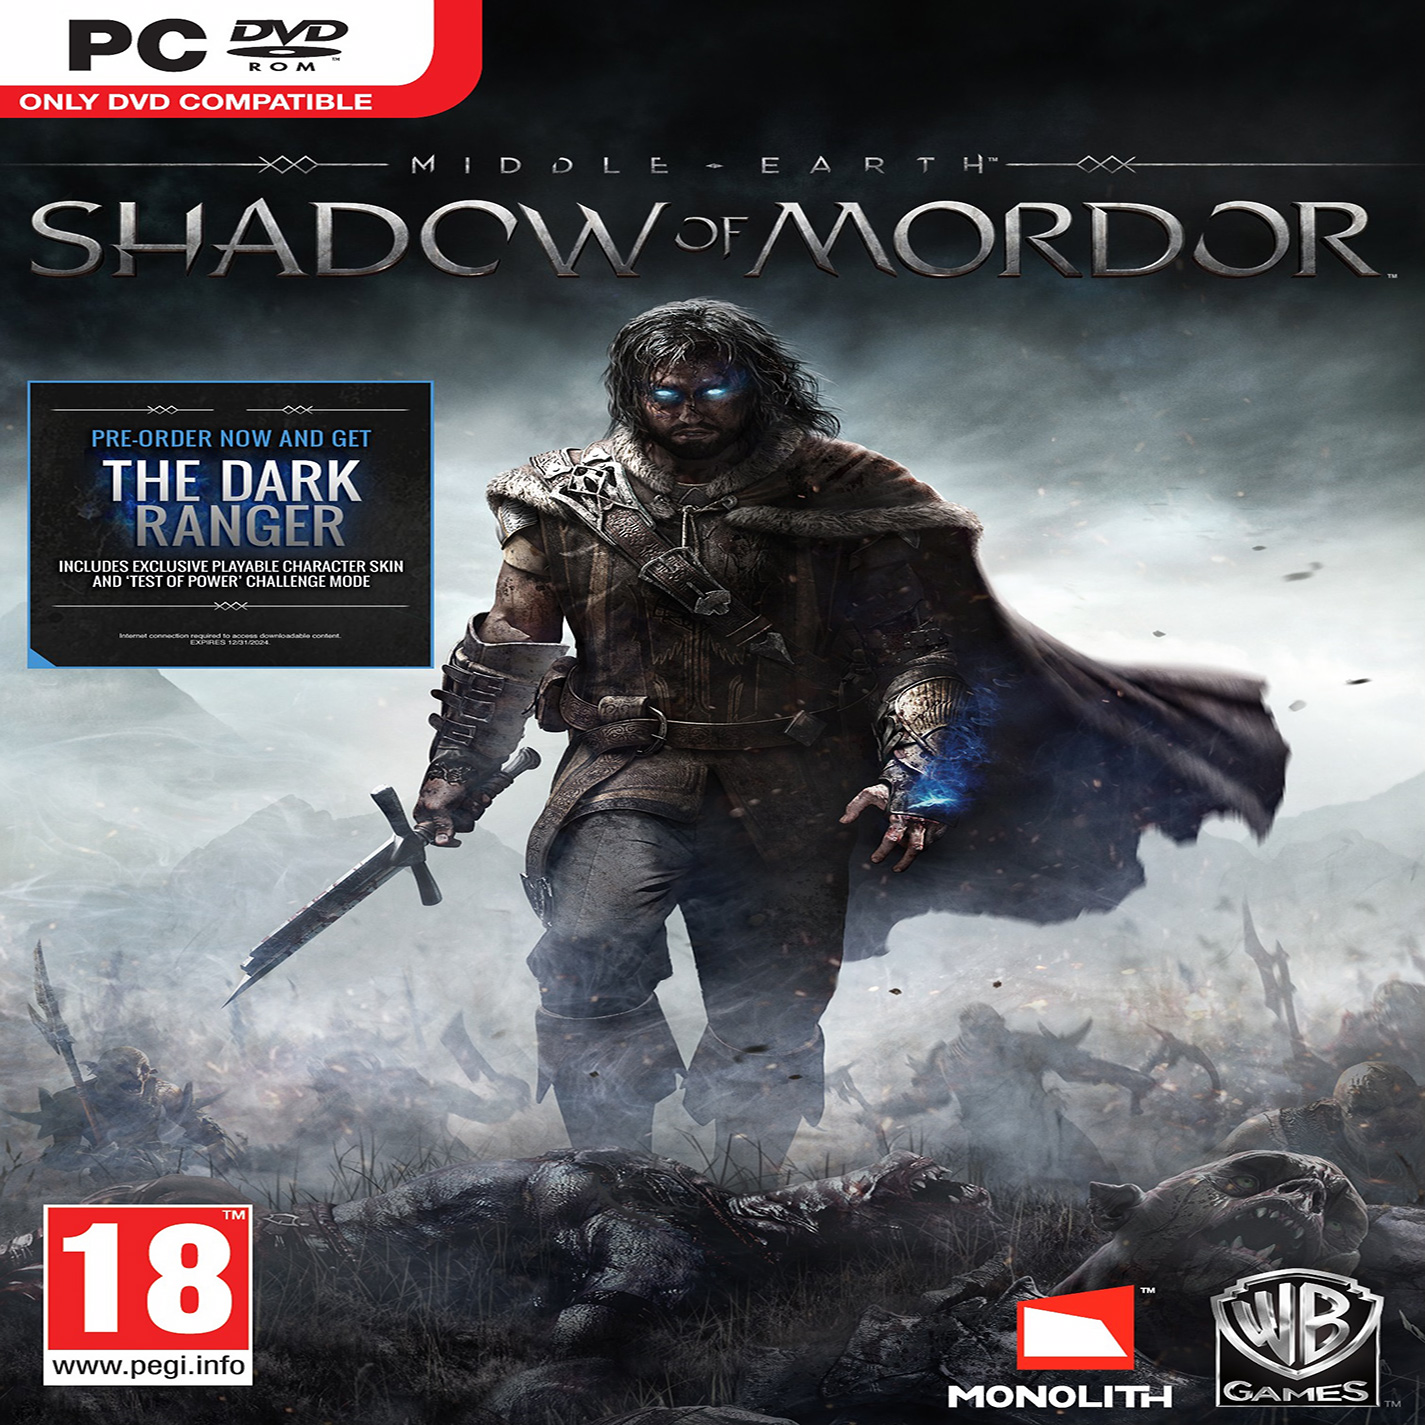 Middle-earth: Shadow of Mordor - predn CD obal